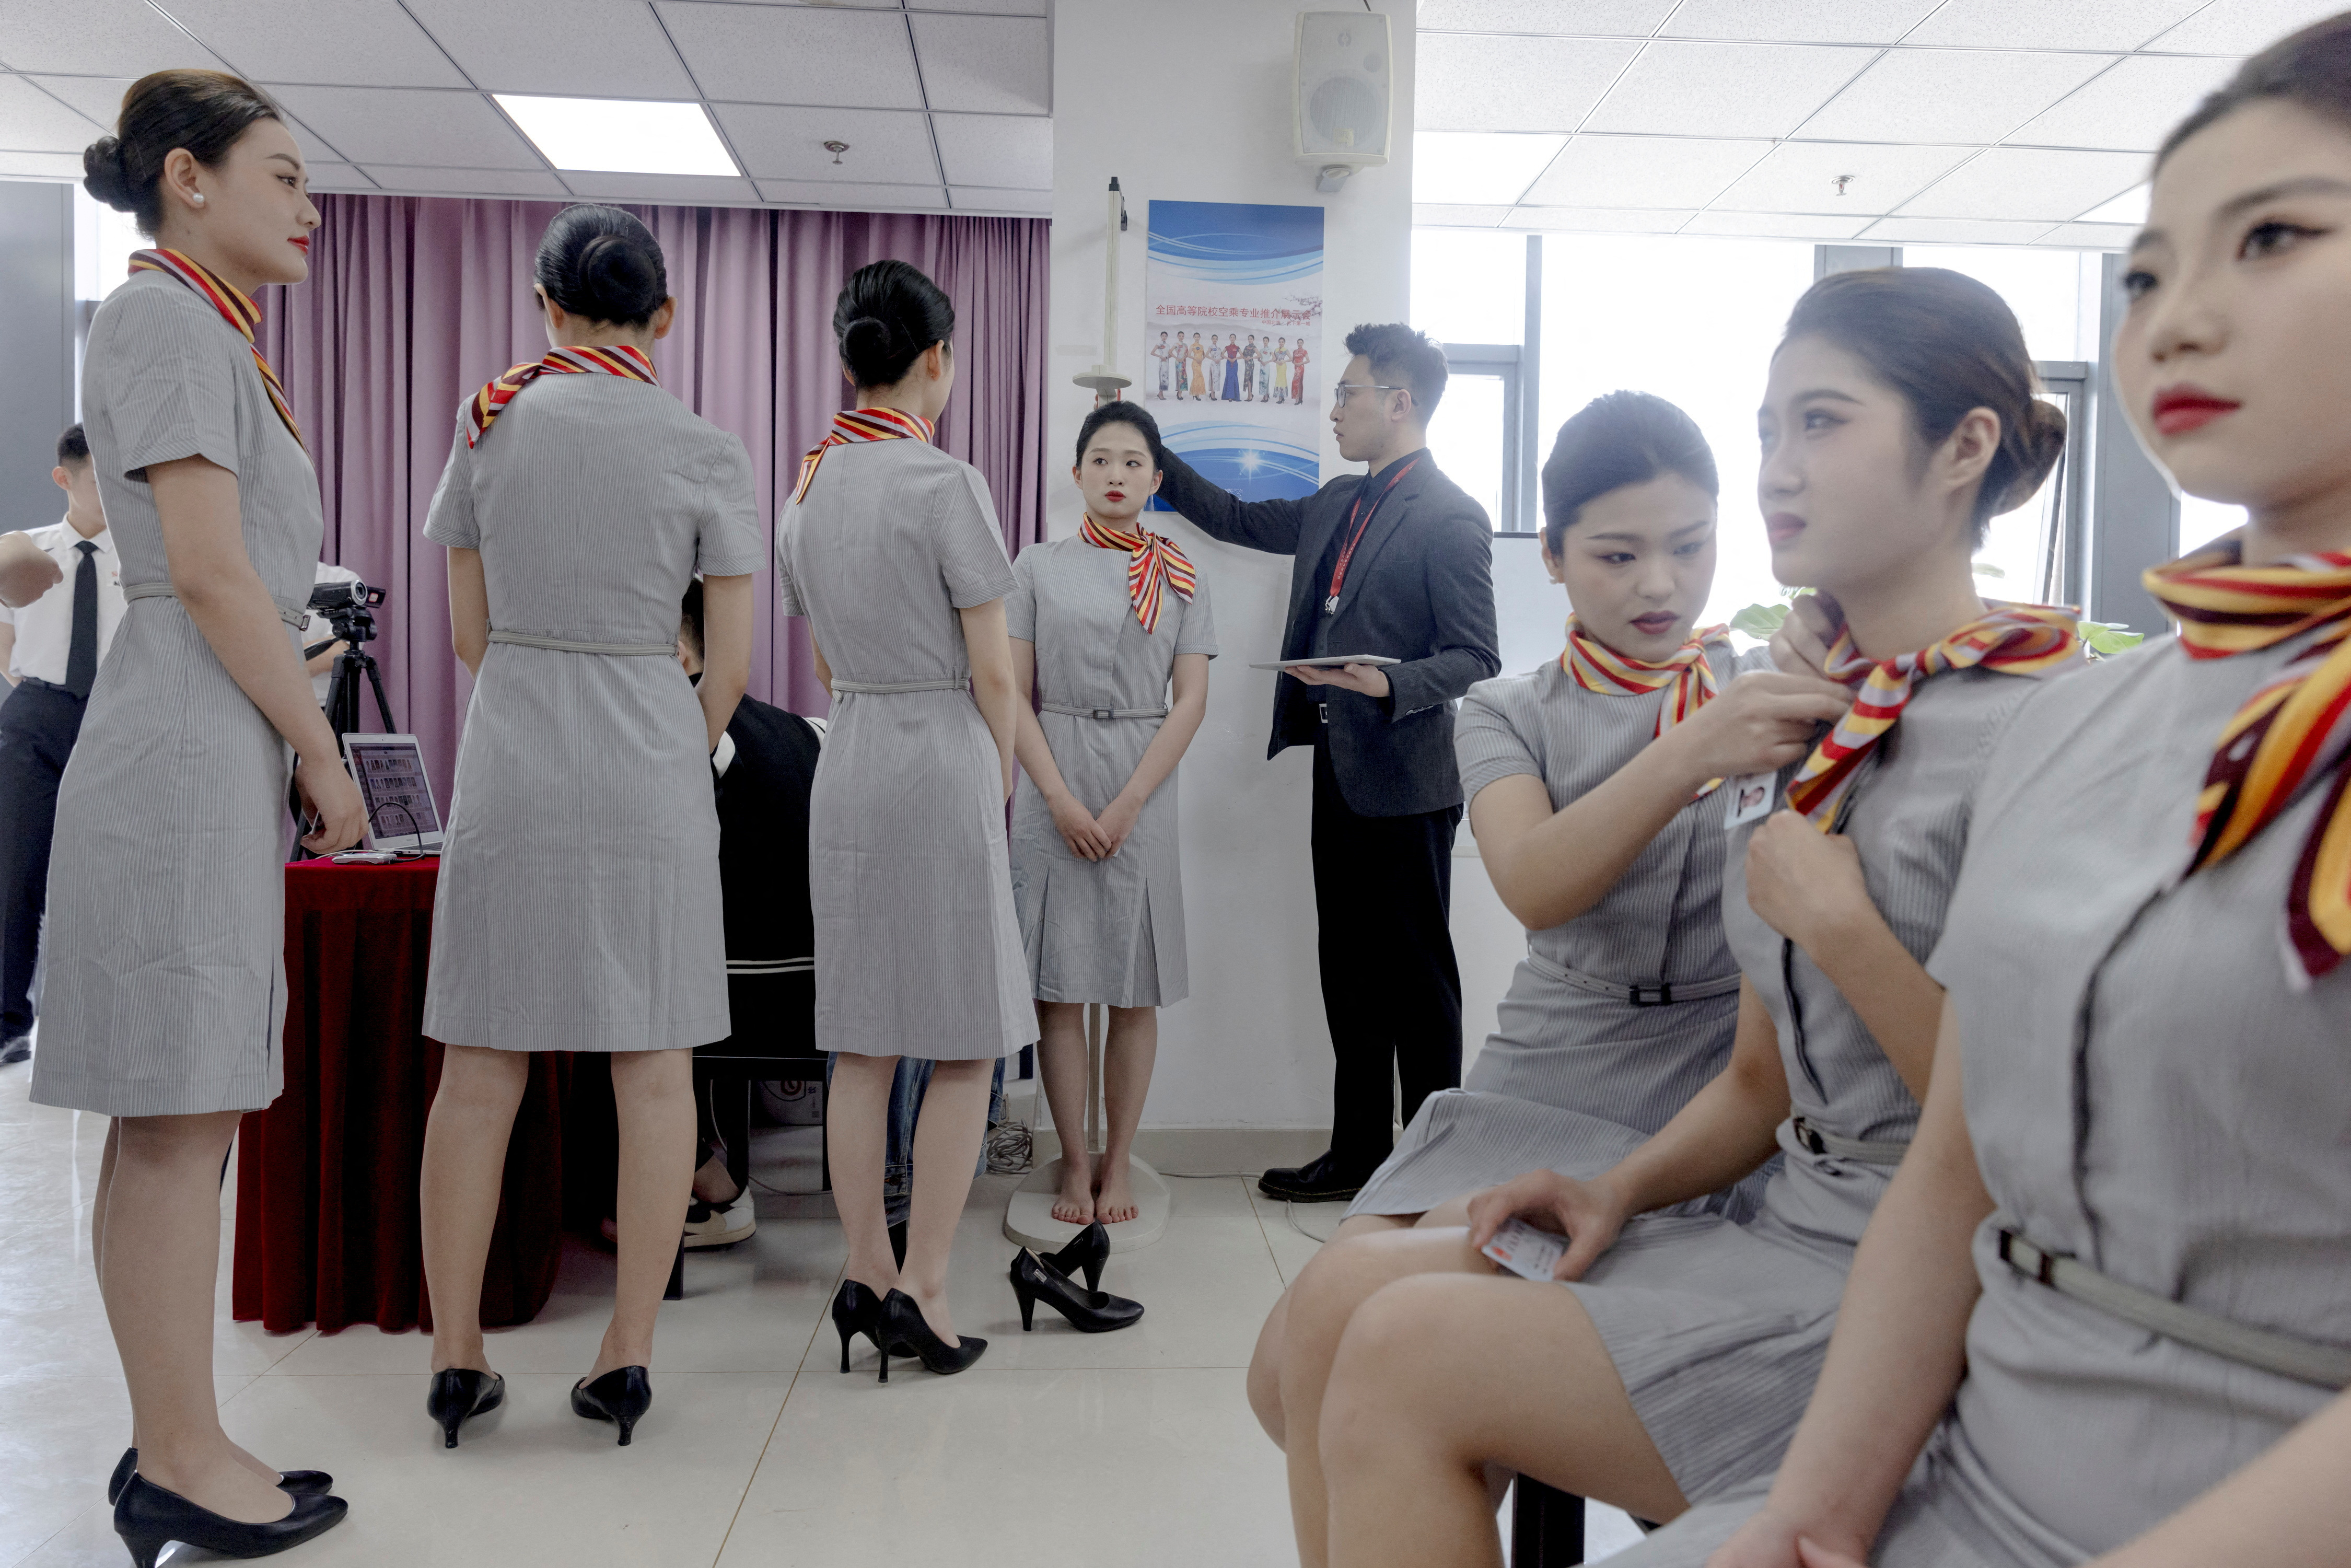 Chinese airlines swamped with cabin crew applicants as travel